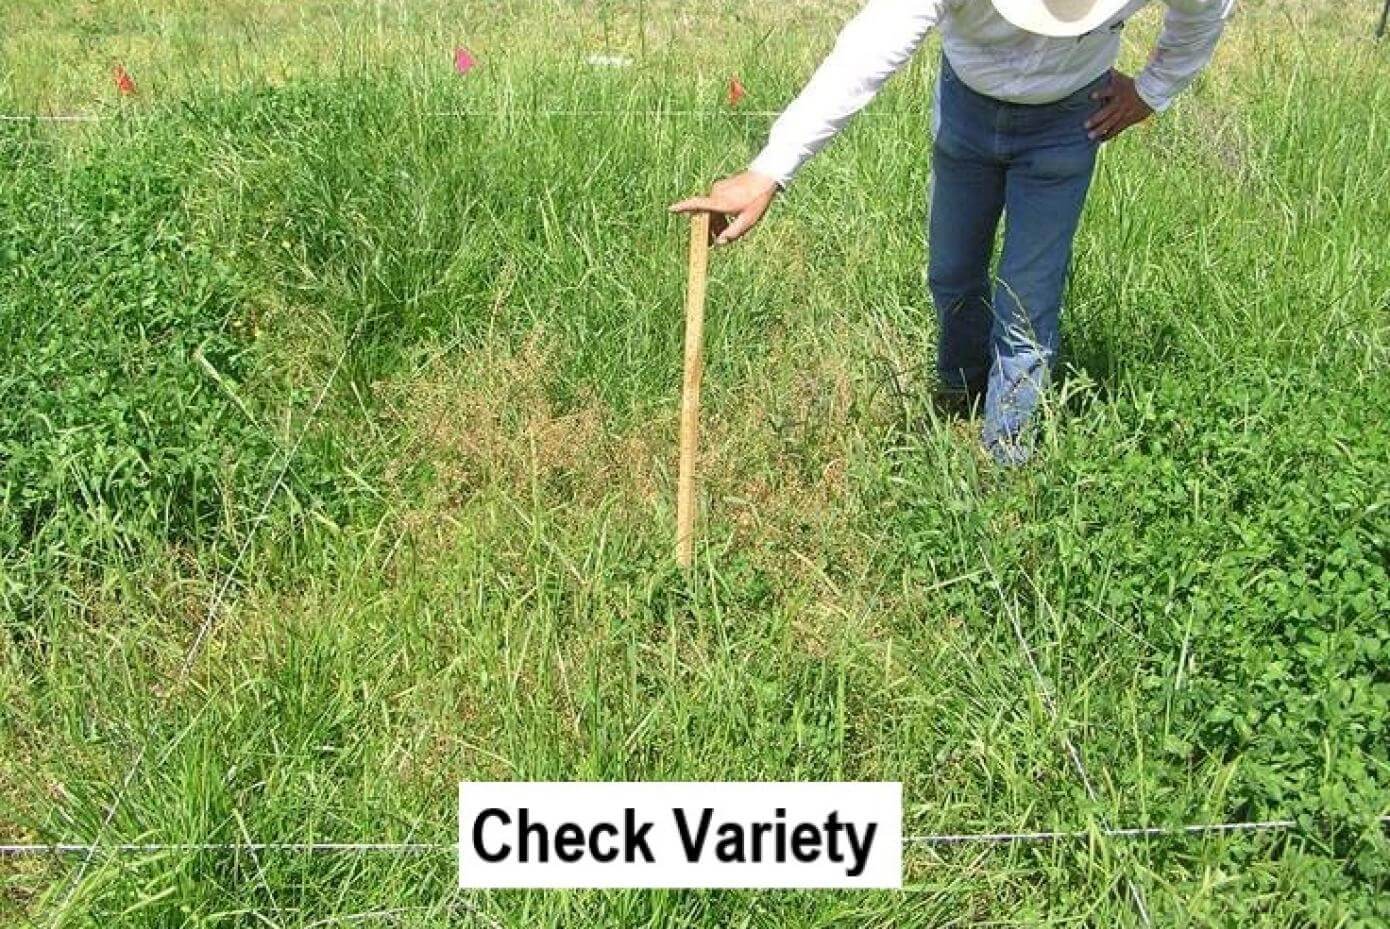 Variety of clover used as a check variety in research trial